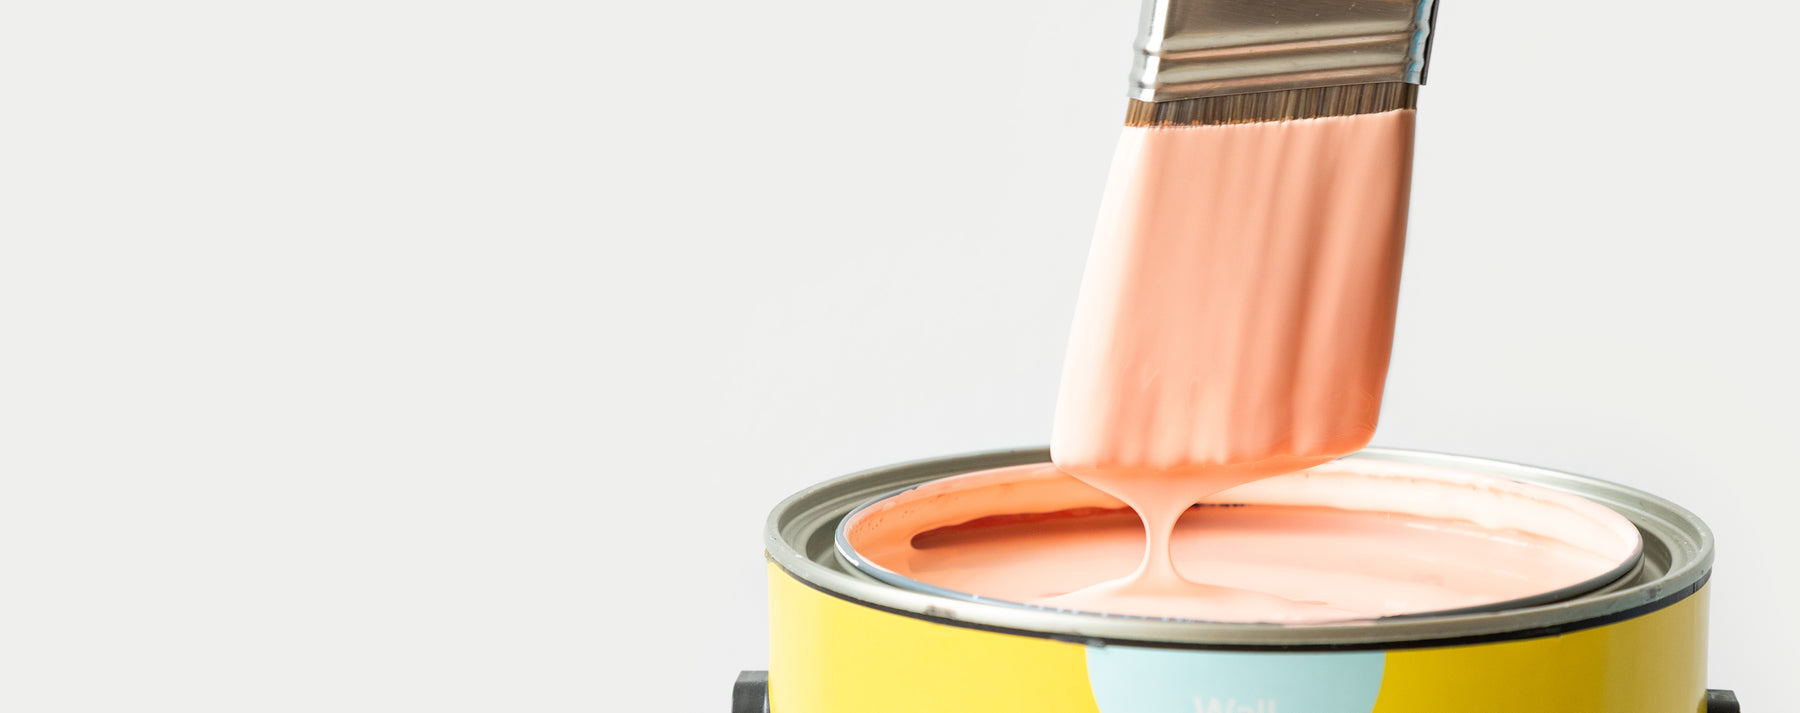 Clare is a modern paint company that makes paint shopping easy and convenient. Find your perfect color and get everything you need to paint, delivered.